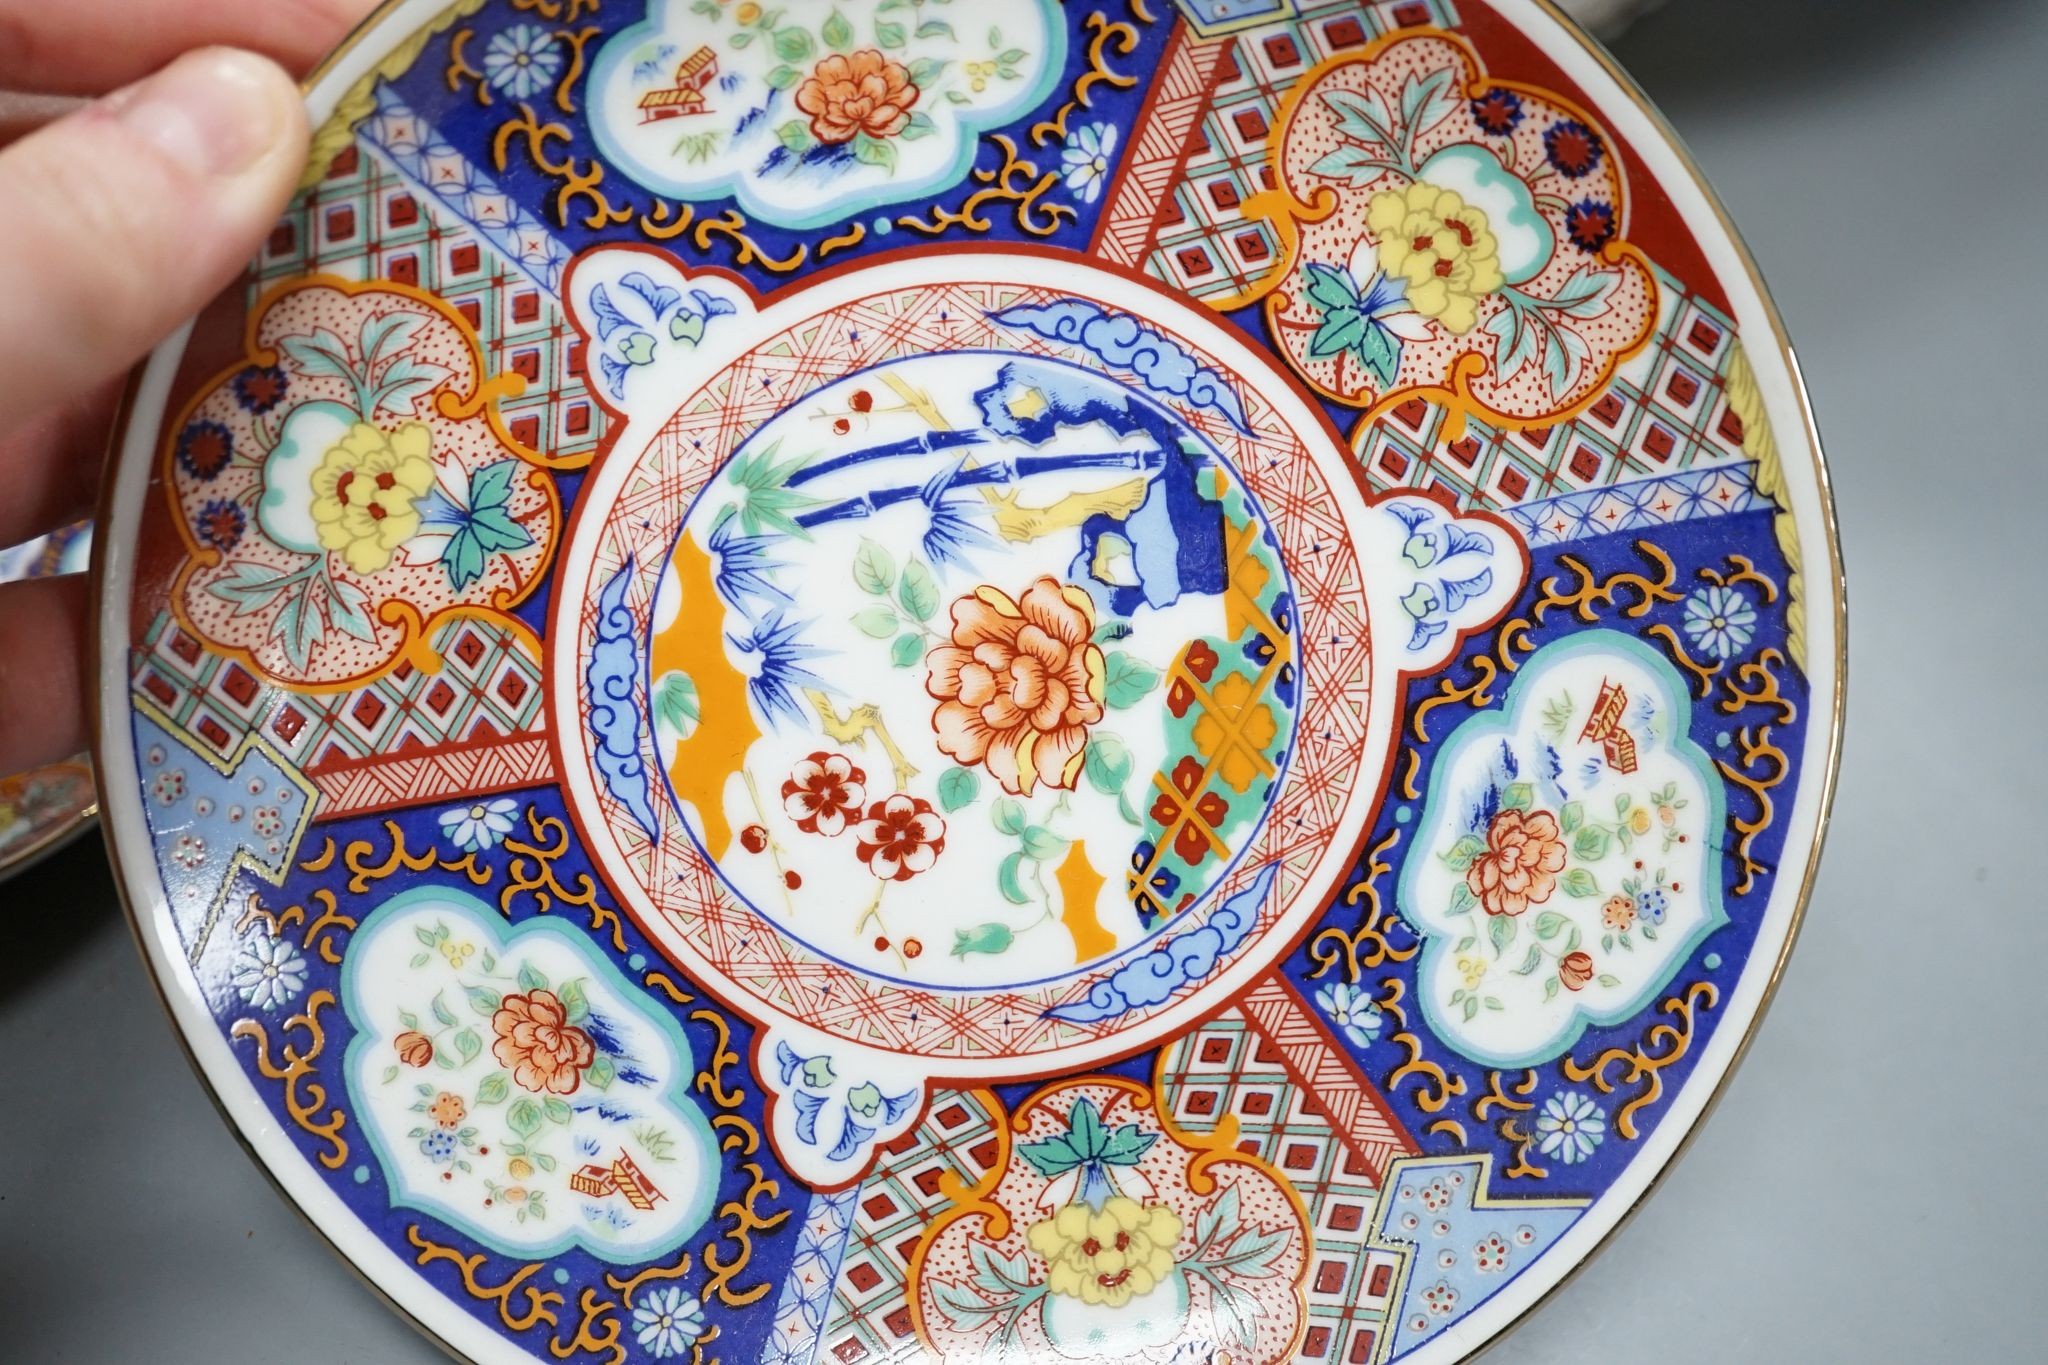 A Royal Crown Derby Imari bowl and two plates and another bowl, 25cm